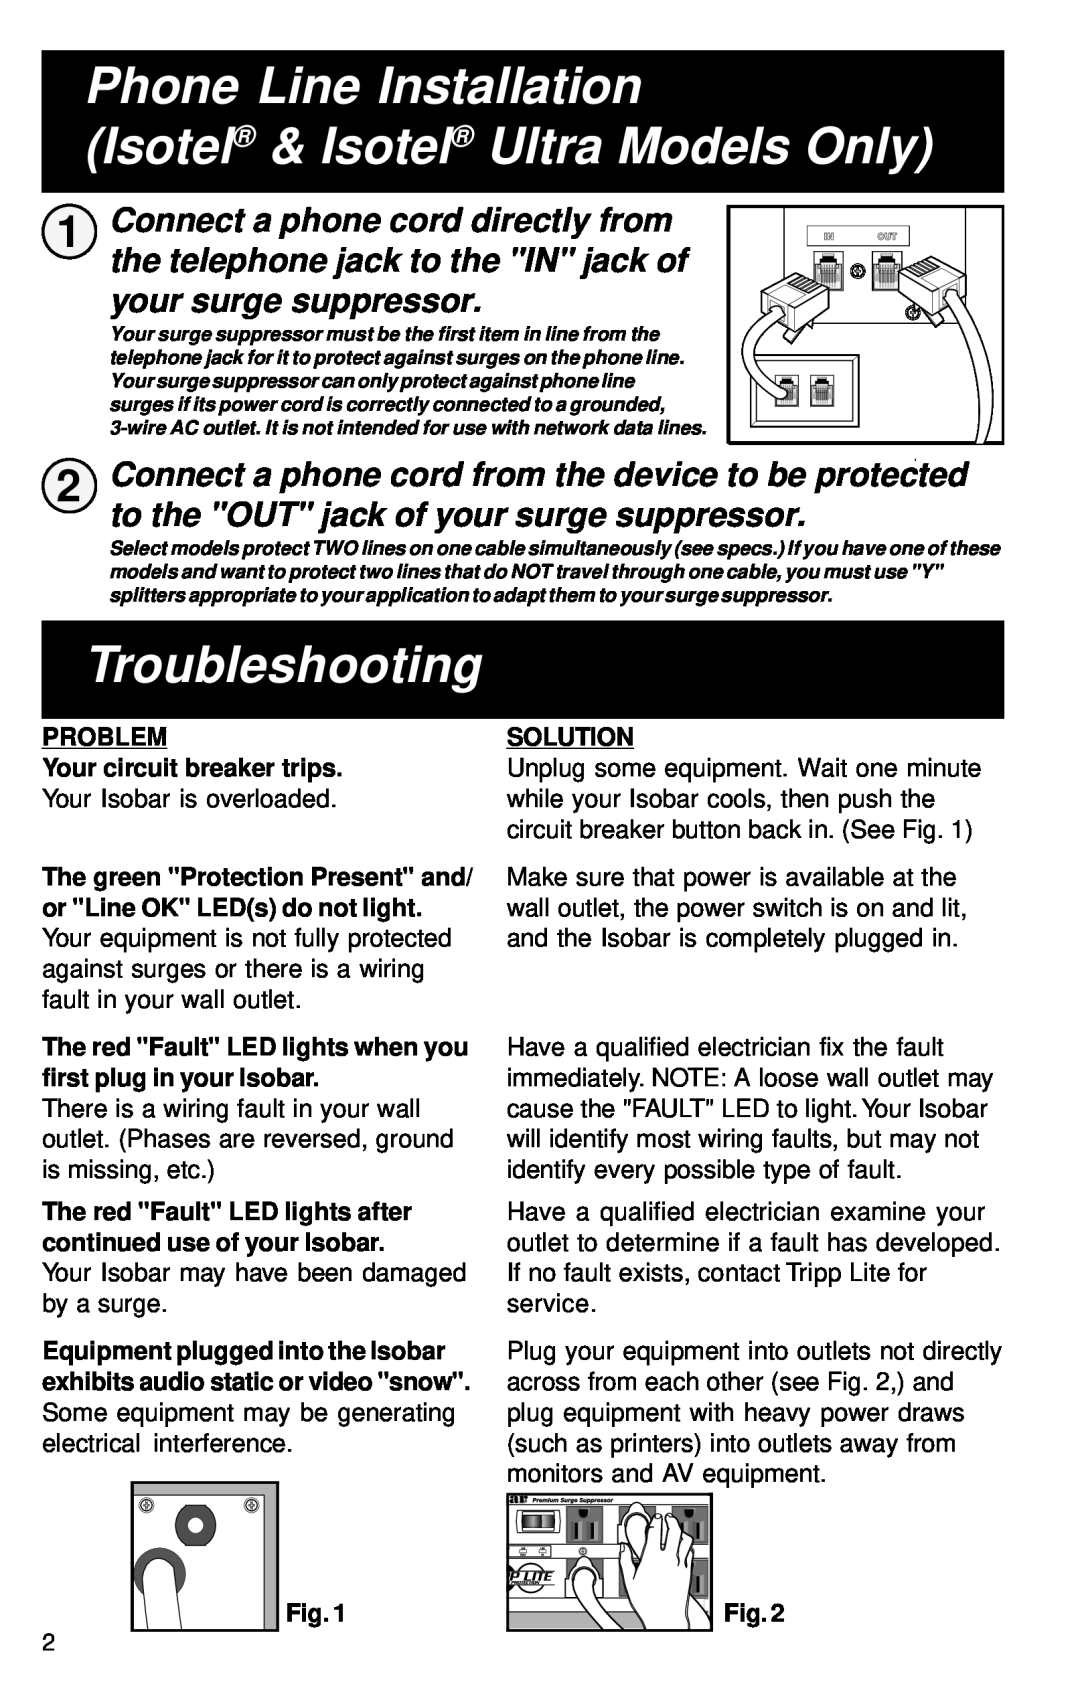 Tripp Lite Isobar Ultra Phone Line Installation Isotel & Isotel Ultra Models Only, Troubleshooting, your surge suppressor 